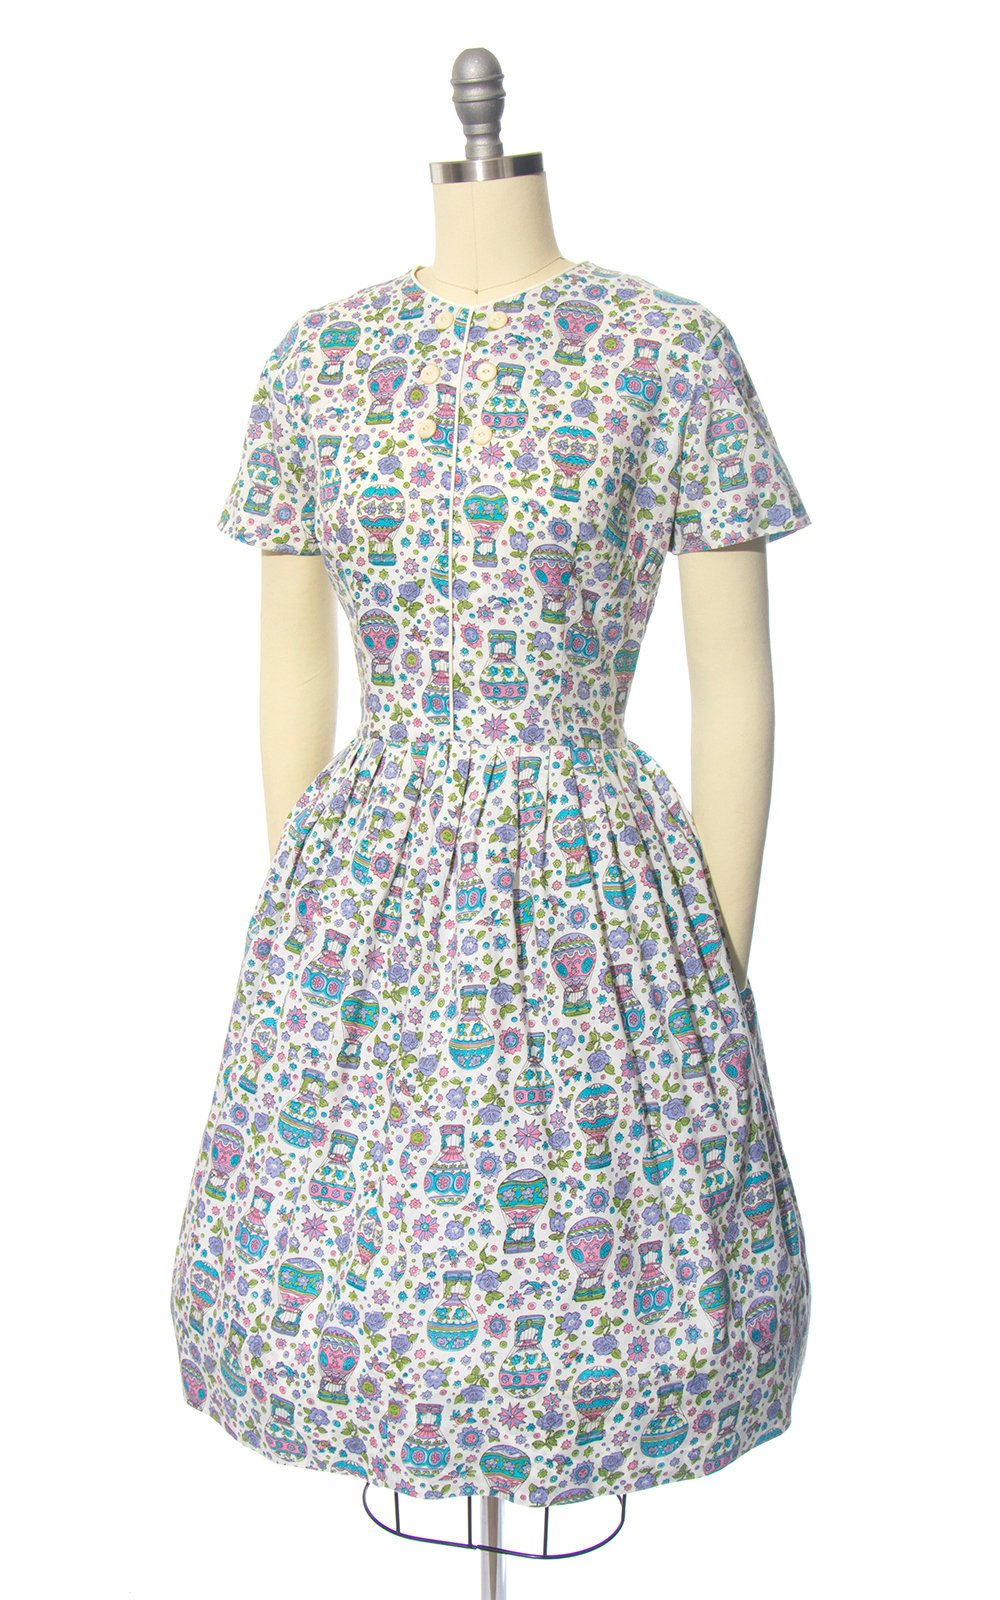 Vintage 1950s Dress | 50s MODE O&#39; DAY Novelty Print Cotton Hot Air Balloon Rose Floral White Full Skirt Day Dress (small/medium)